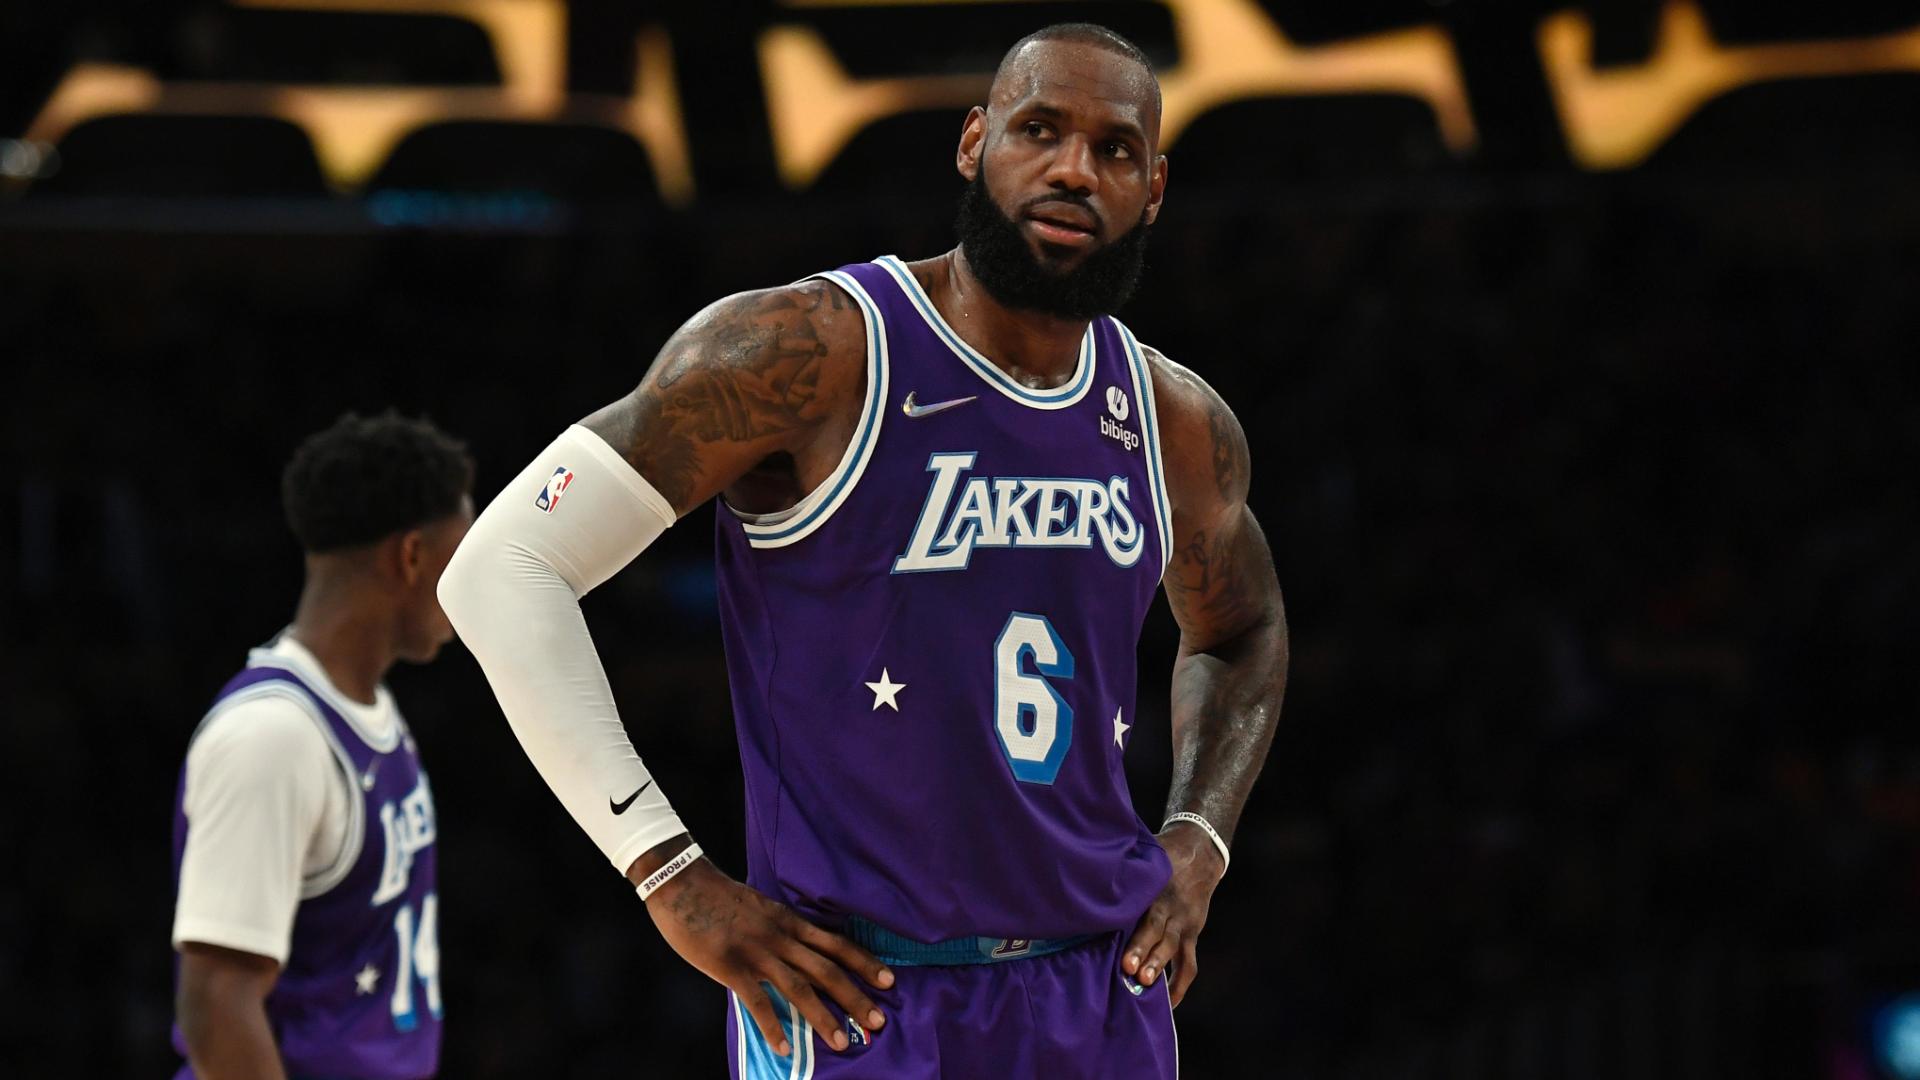 LeBron misses everything on game-tying attempt as Lakers drop to Pelicans